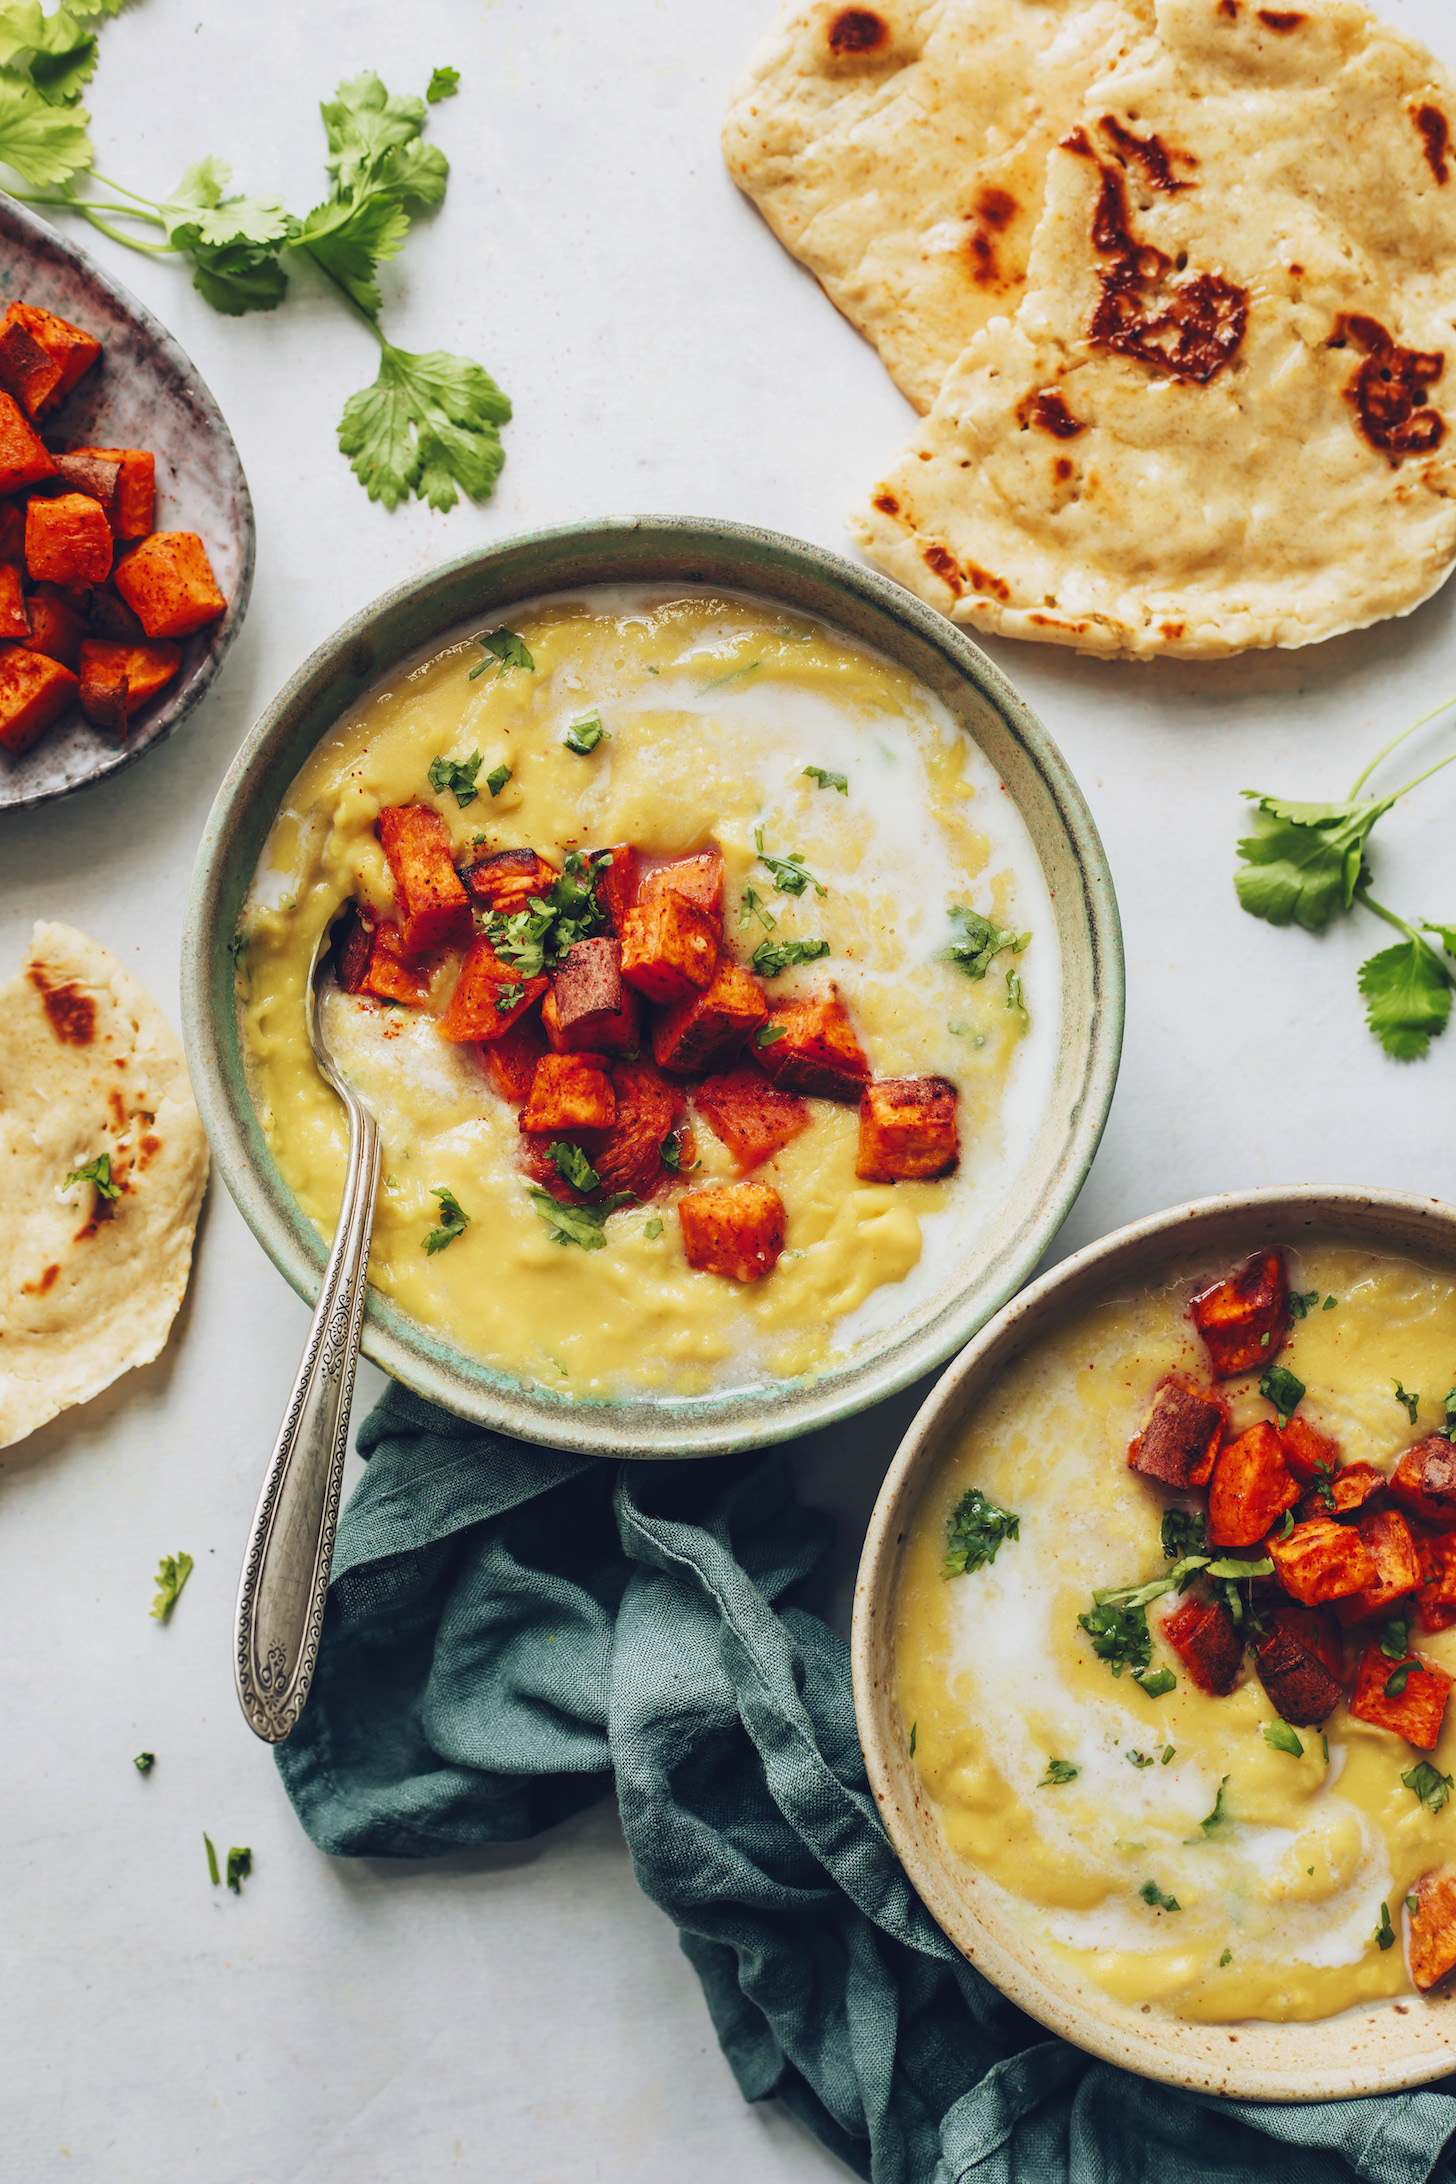 Two bowls of Instant Pot yellow split pea soup beside roasted sweet potatoes and naan